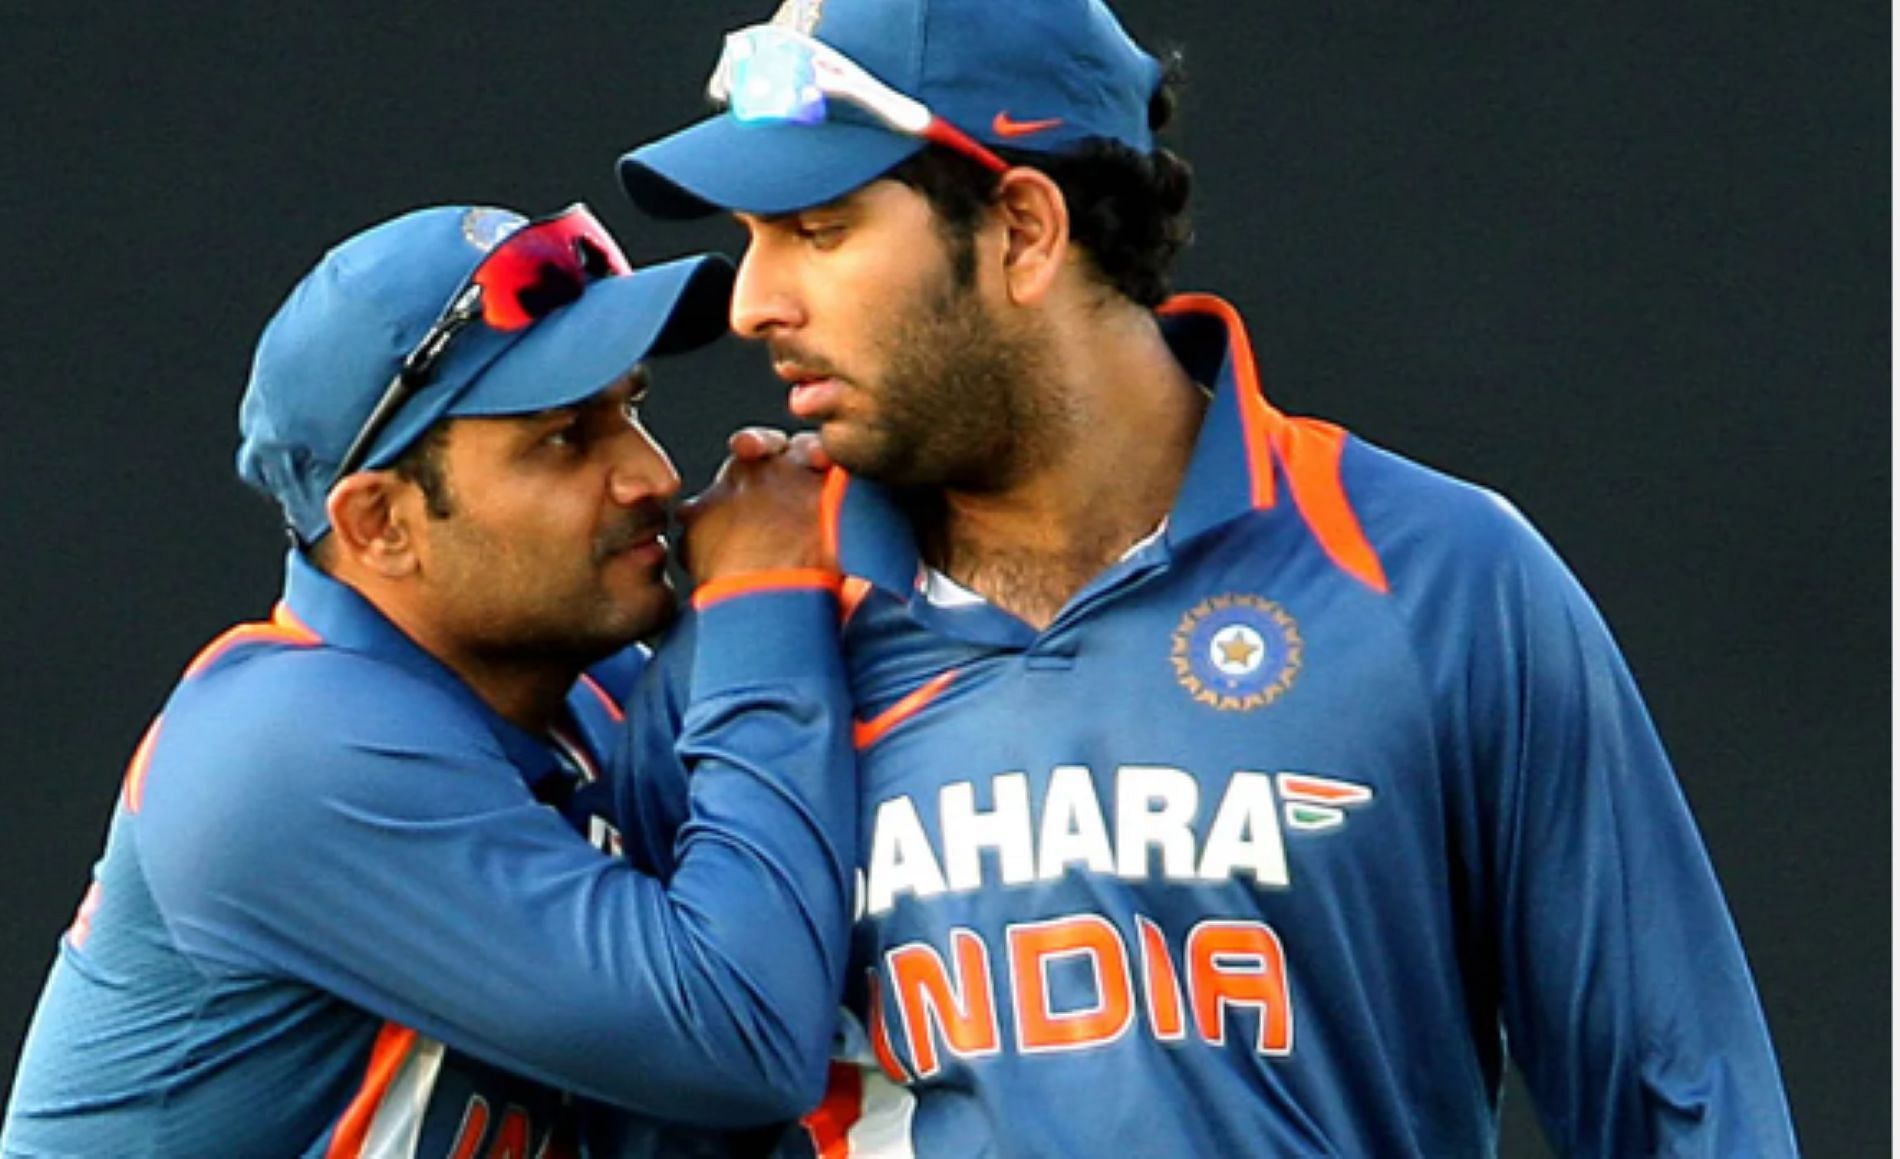 Sehwag and Yuvraj formed a destructive opening and middle-order combo for India in the 2000s.